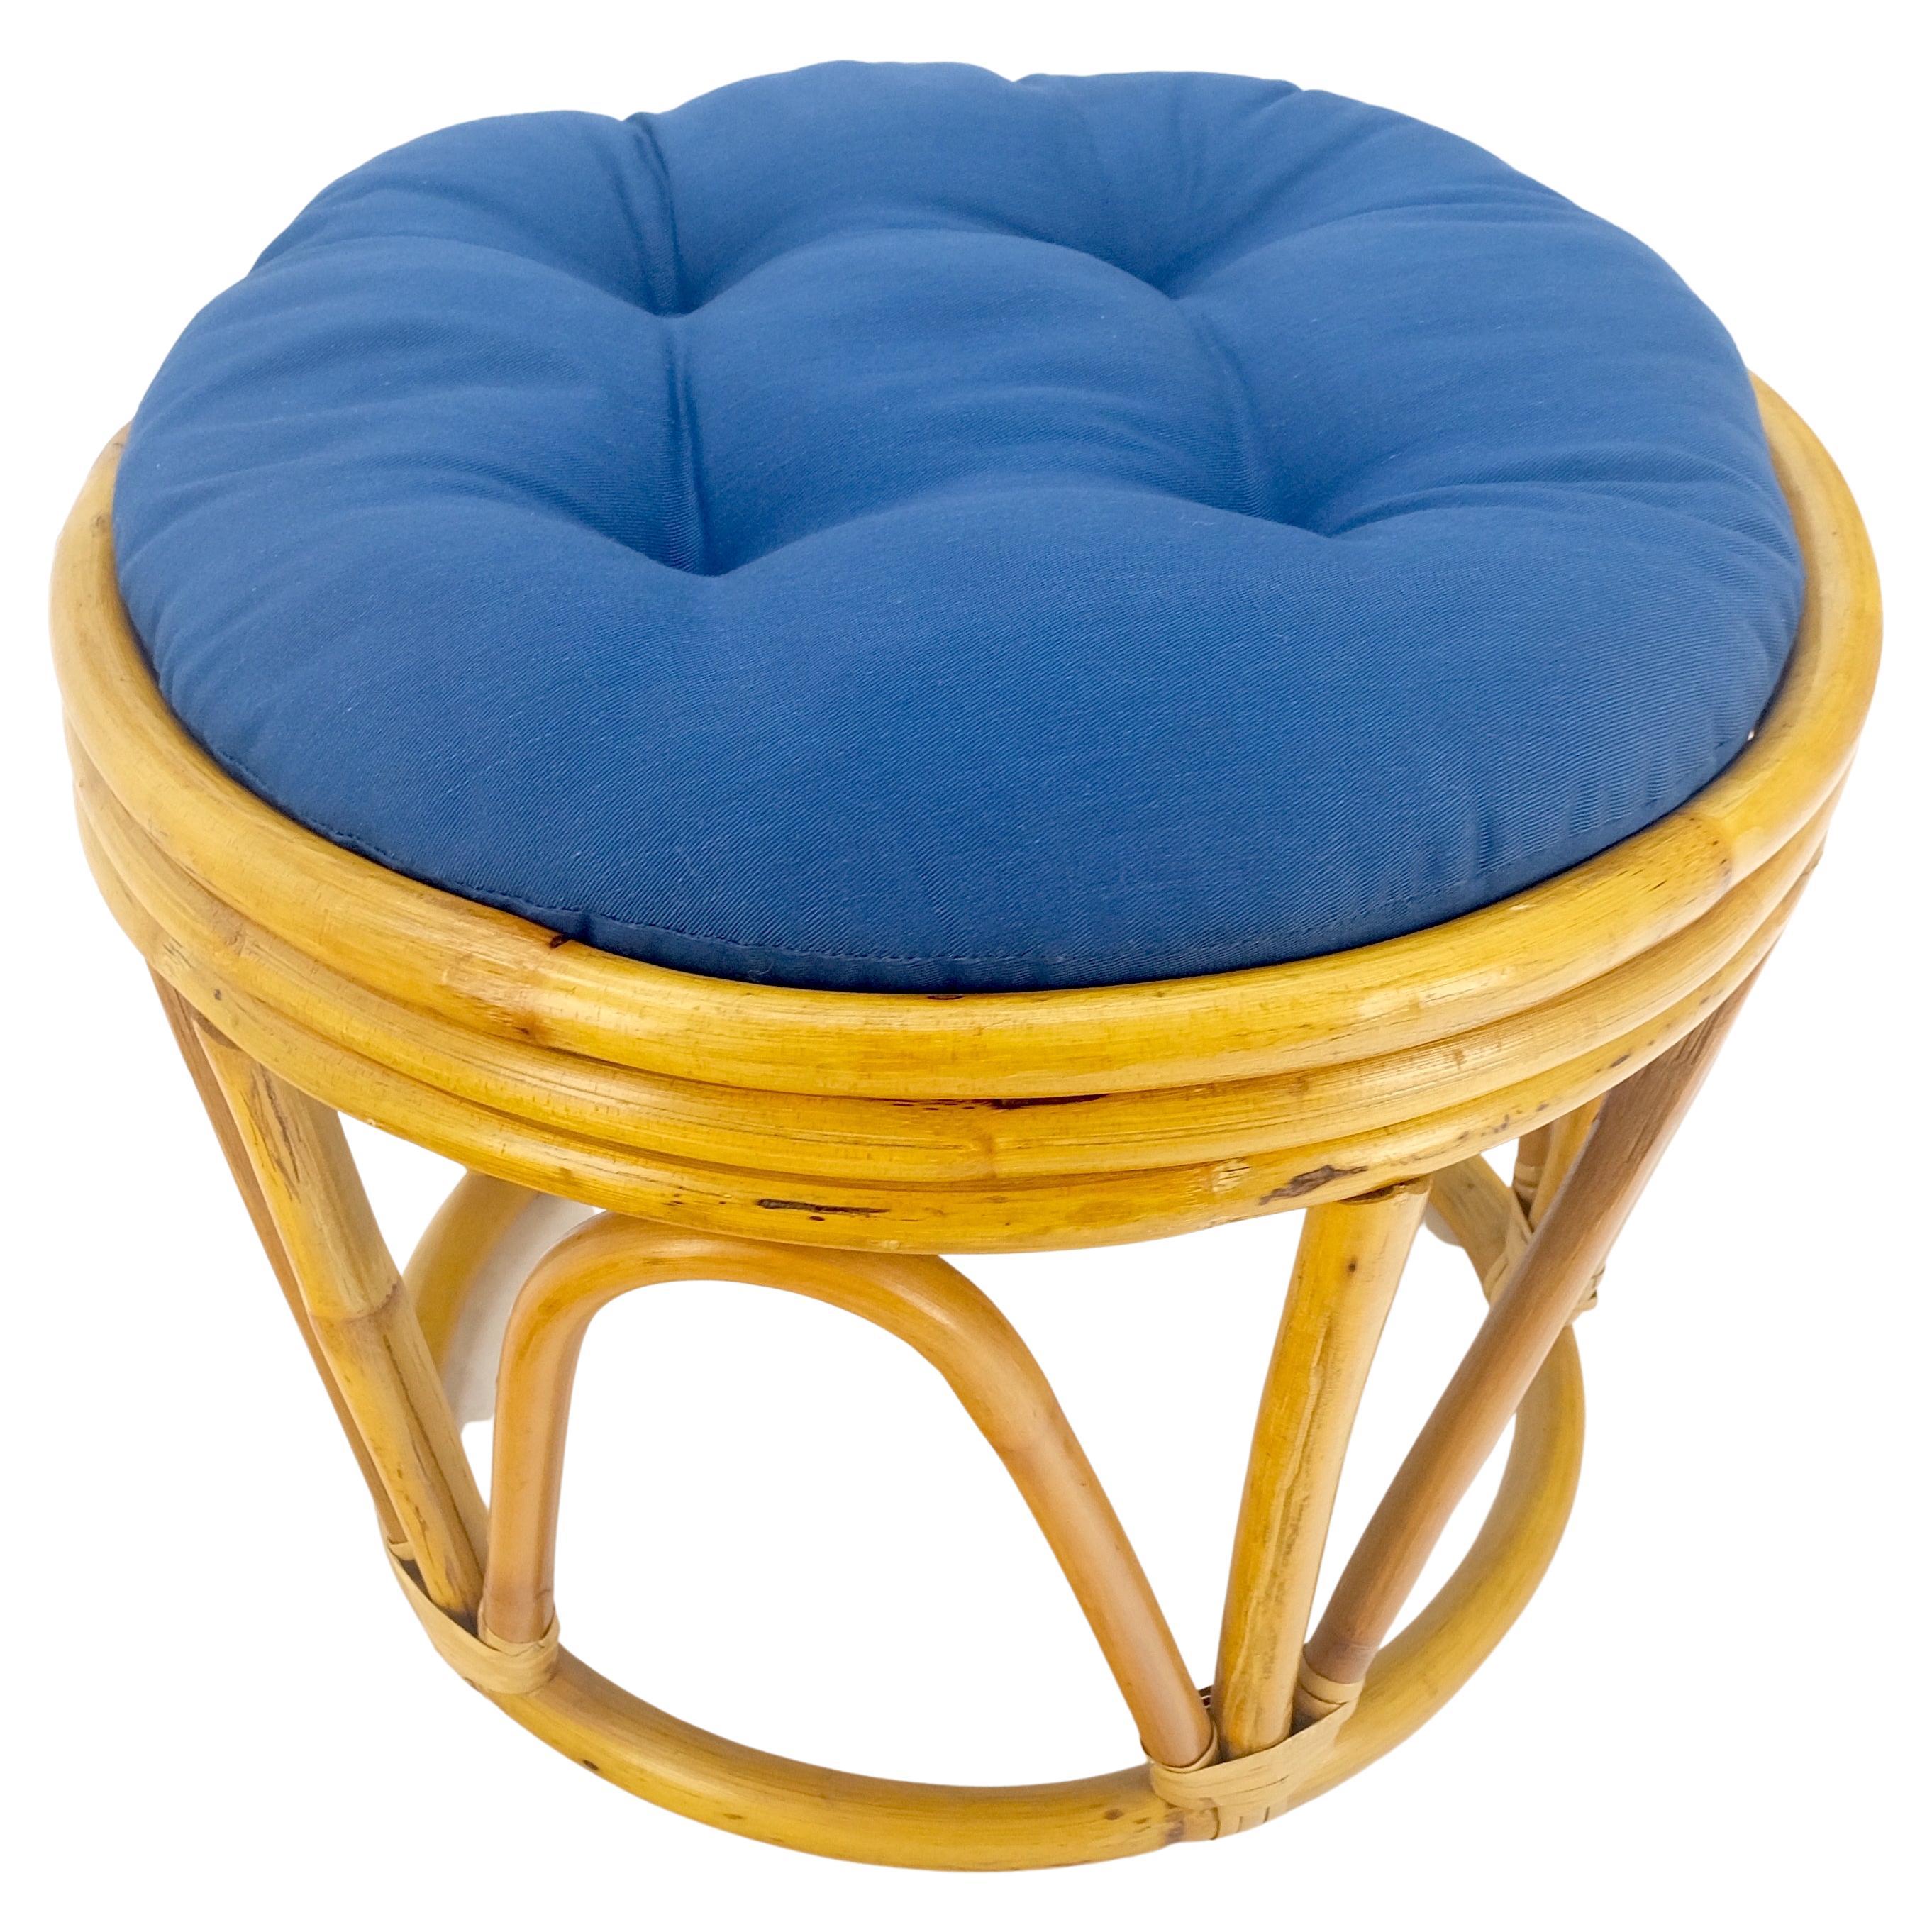 Round Mid Century Modern  Blue Upholstery Ottoman Foot Stool Bench Pouf MINT! For Sale